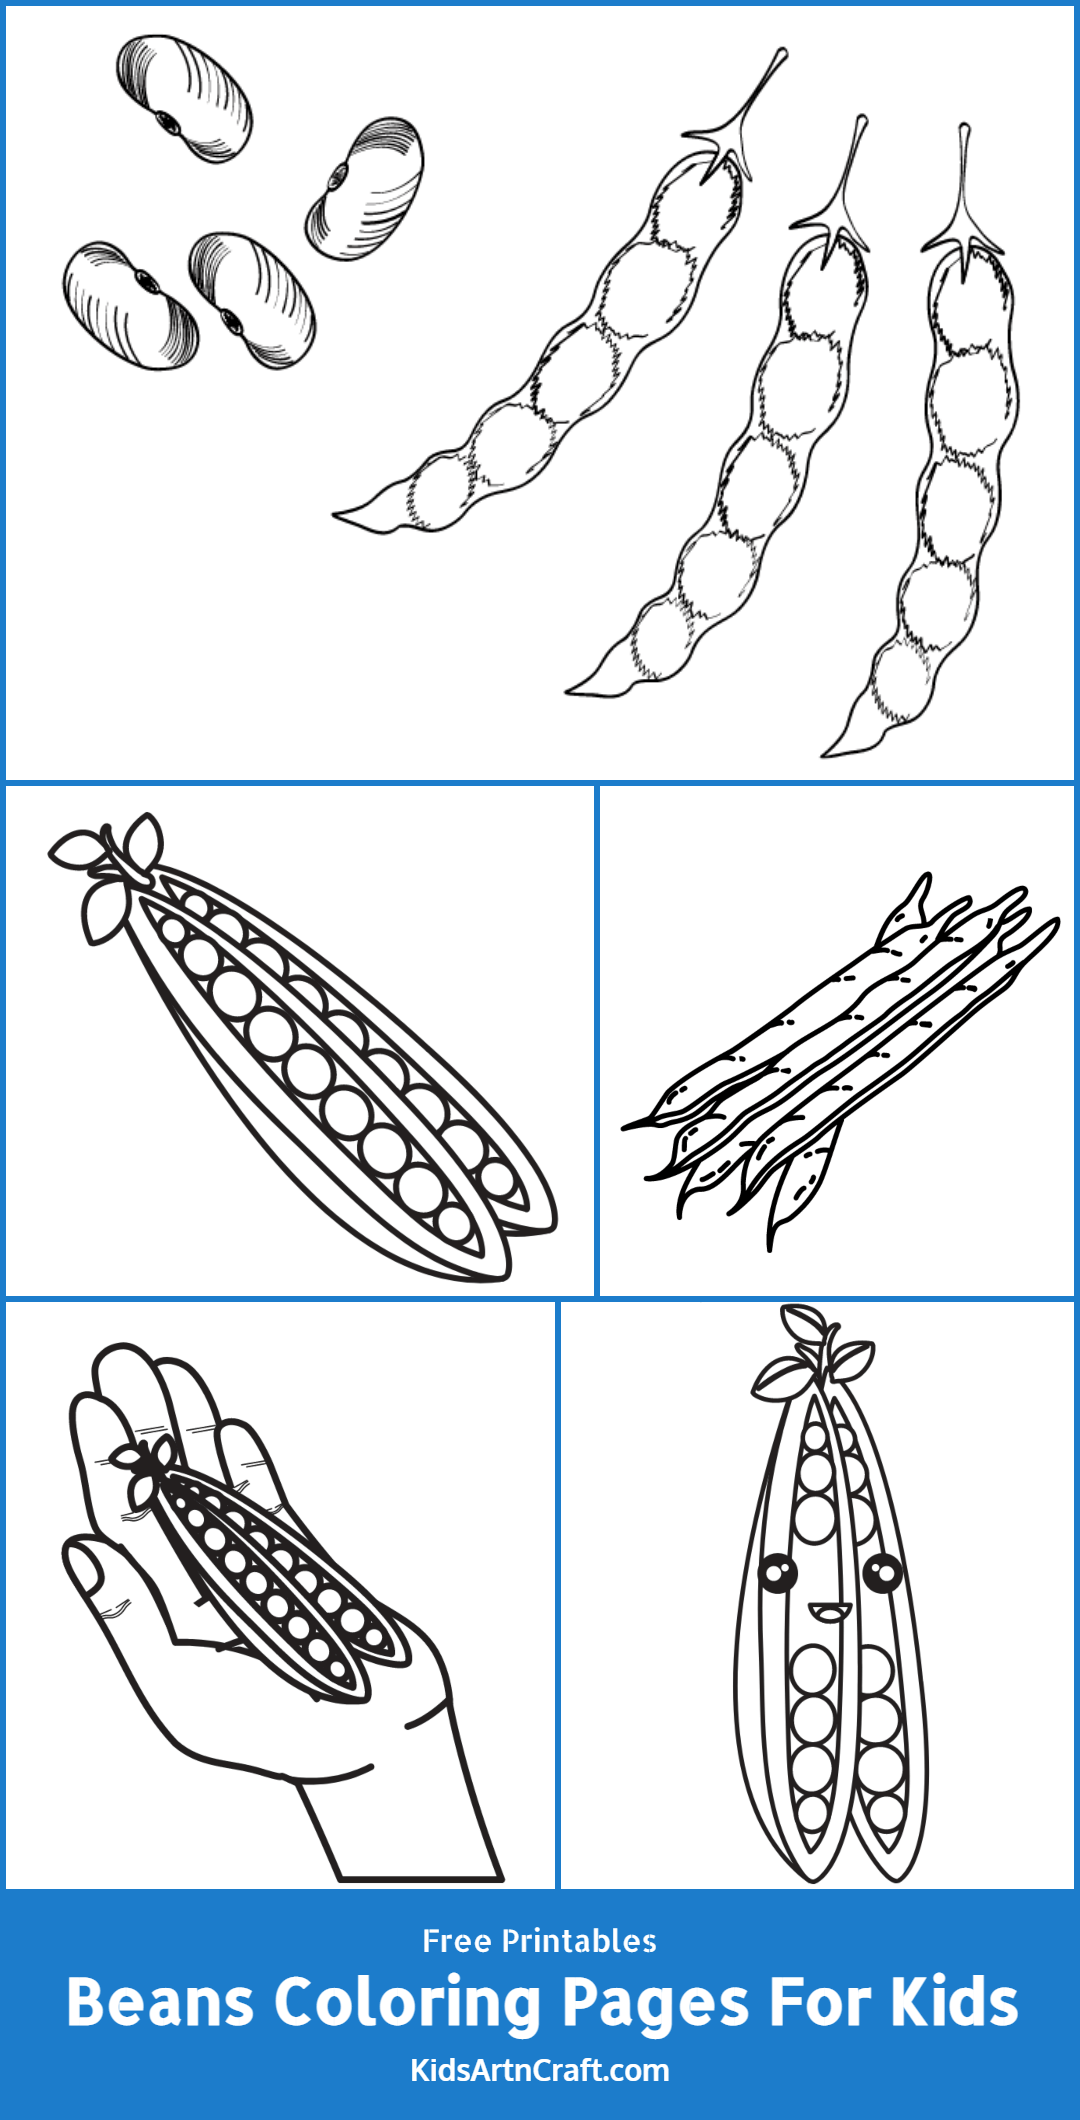 Beans Coloring Pages For Kids – Free Printables